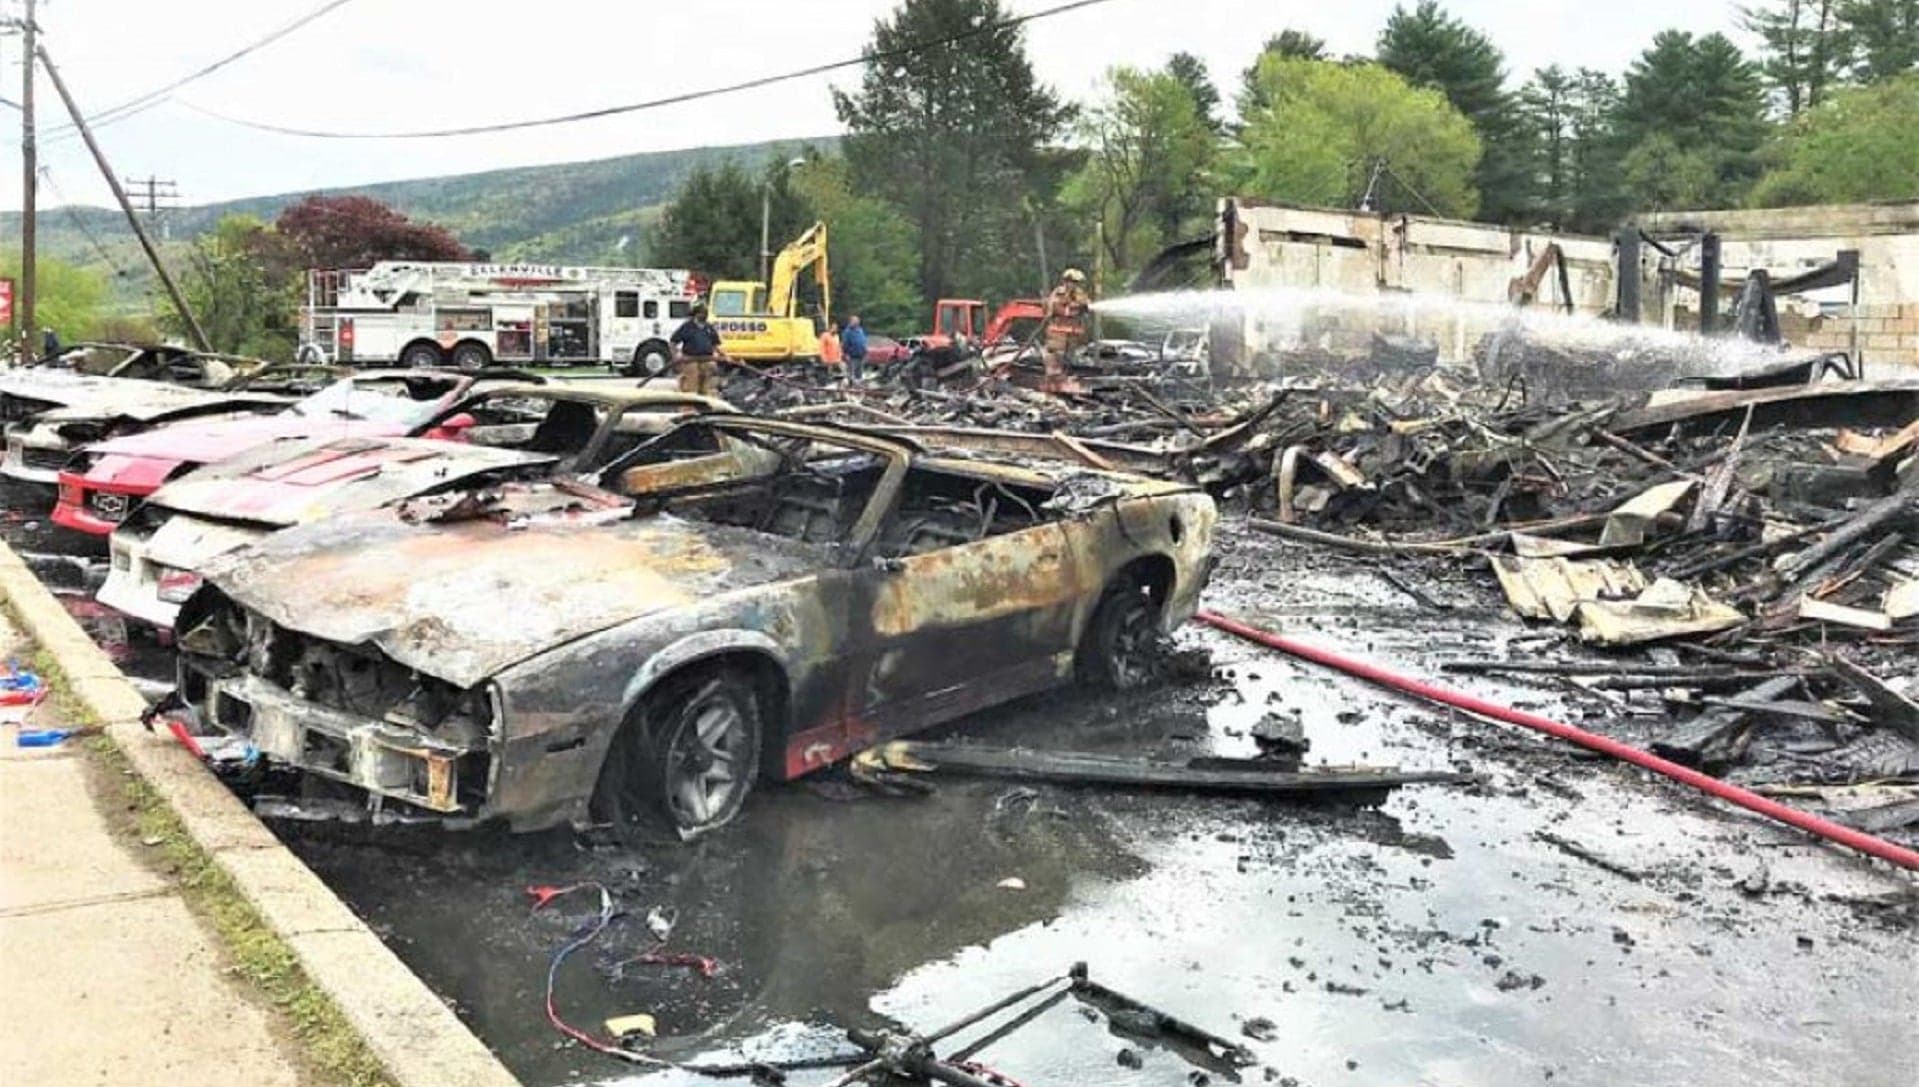 Dozens of Vintage Chevrolet Corvettes and Camaros Destroyed by Fire in HBO Filming Set